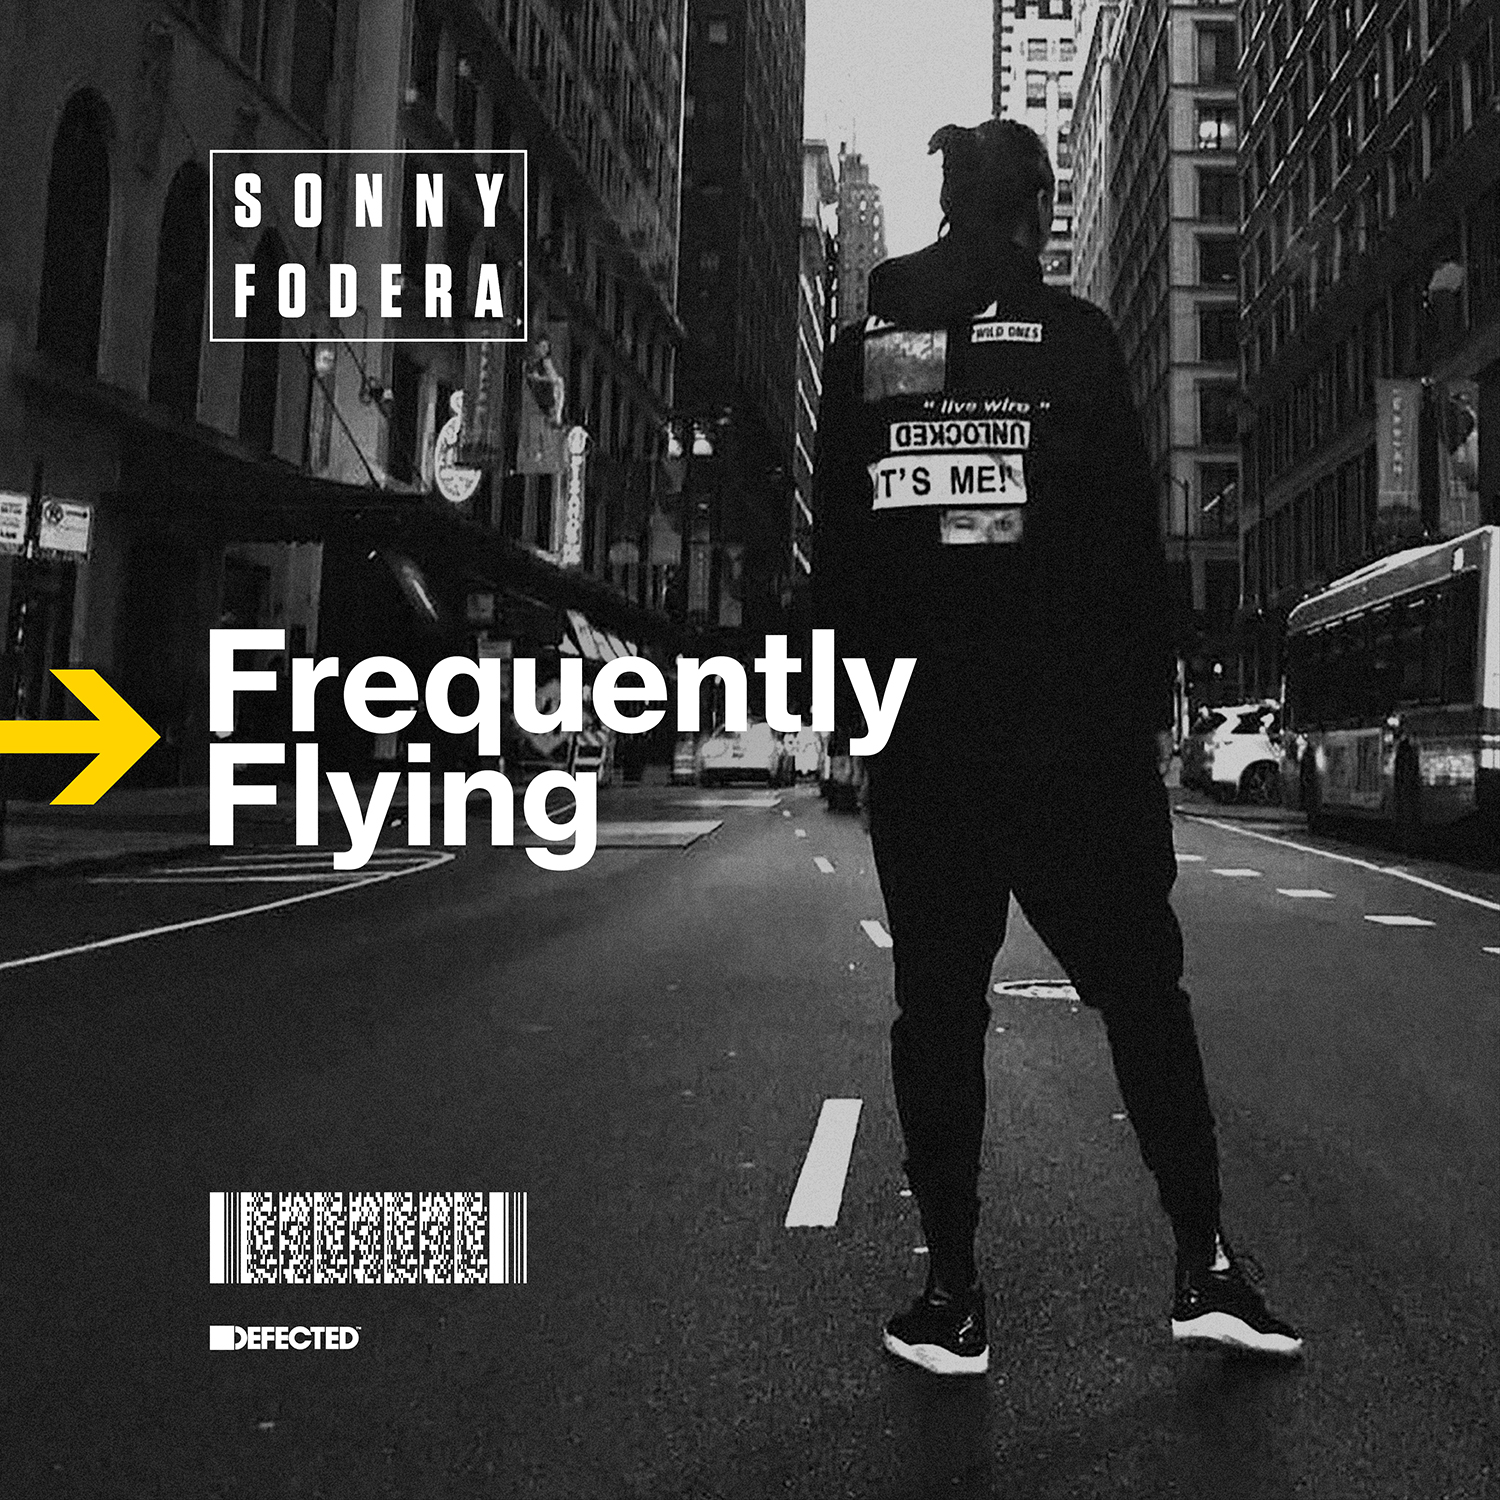 SONNY FODERA PREPS 'FREQUENTLY FLYING' ALBUM FOR DEFECTED